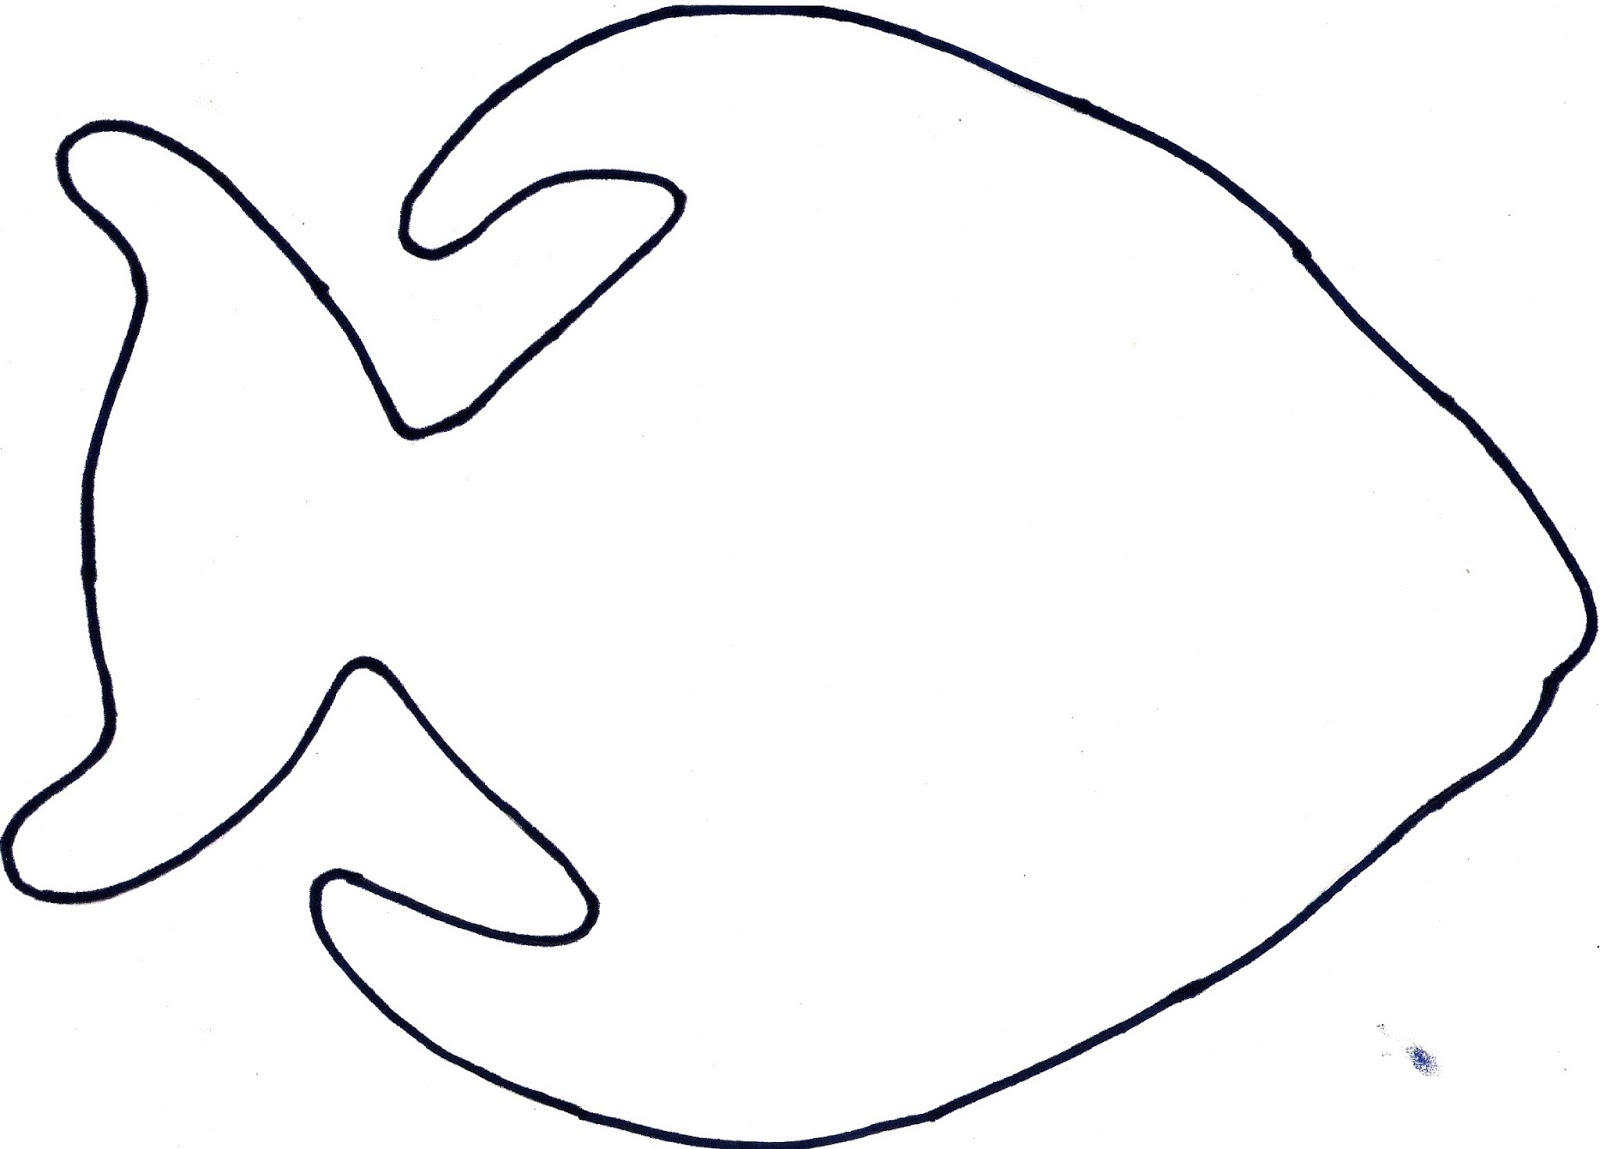 Fishes Outlines - ClipArt Best